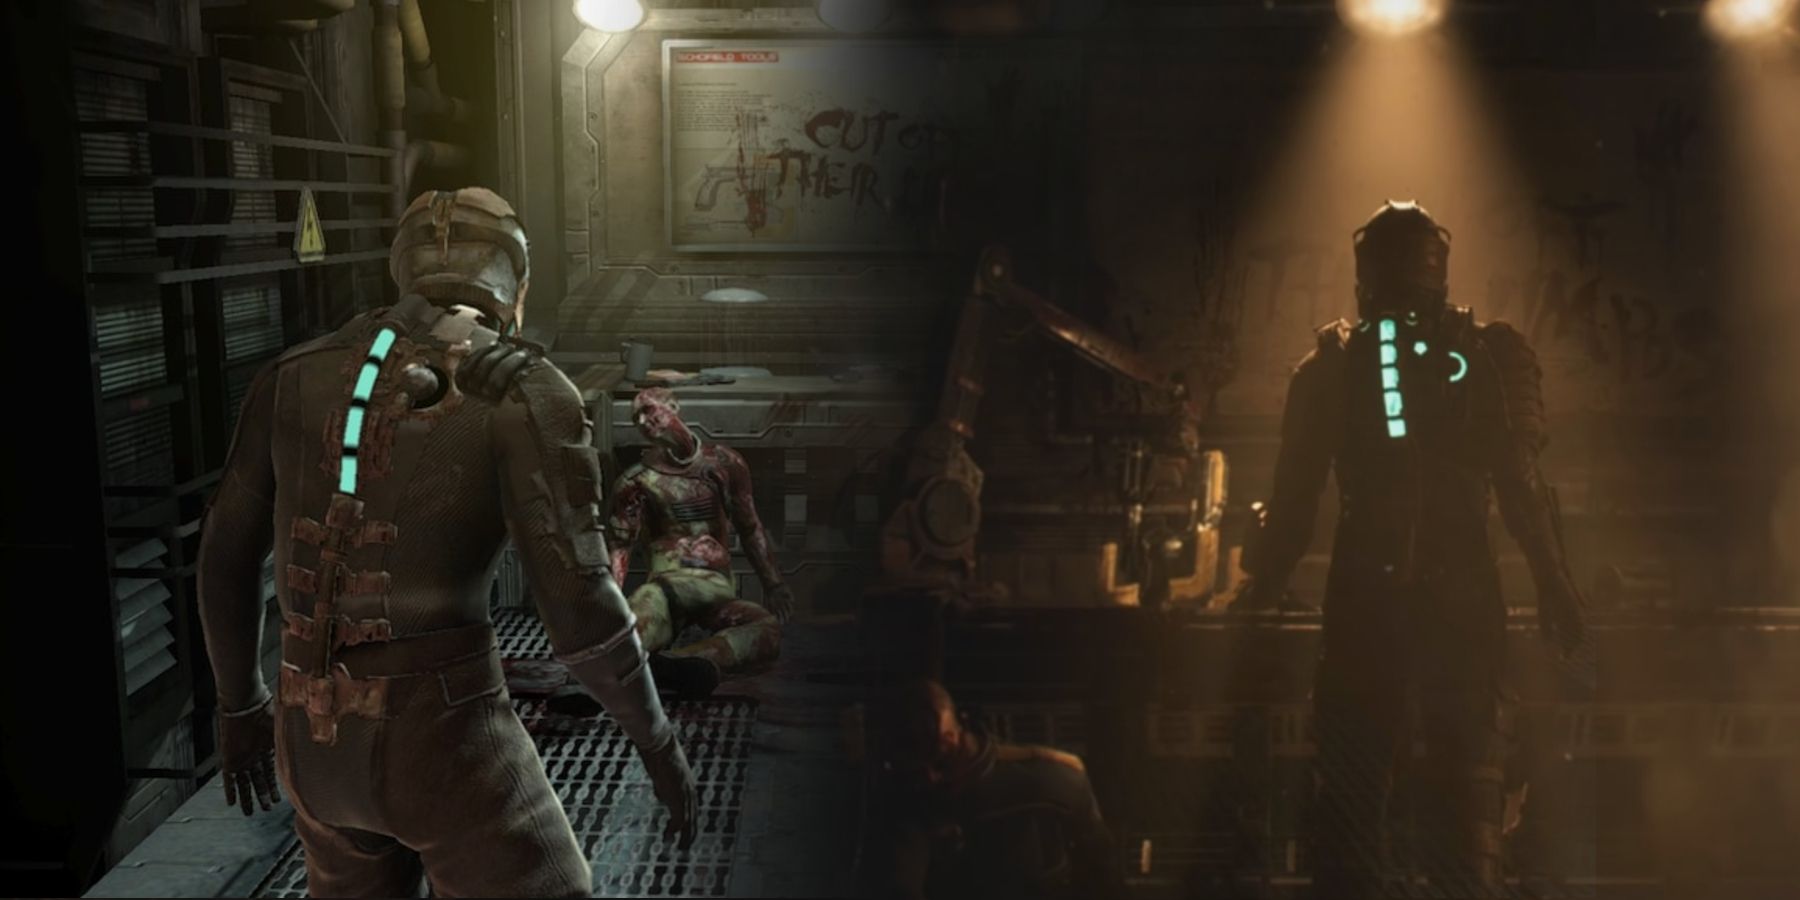 dead space graphics of both games feature